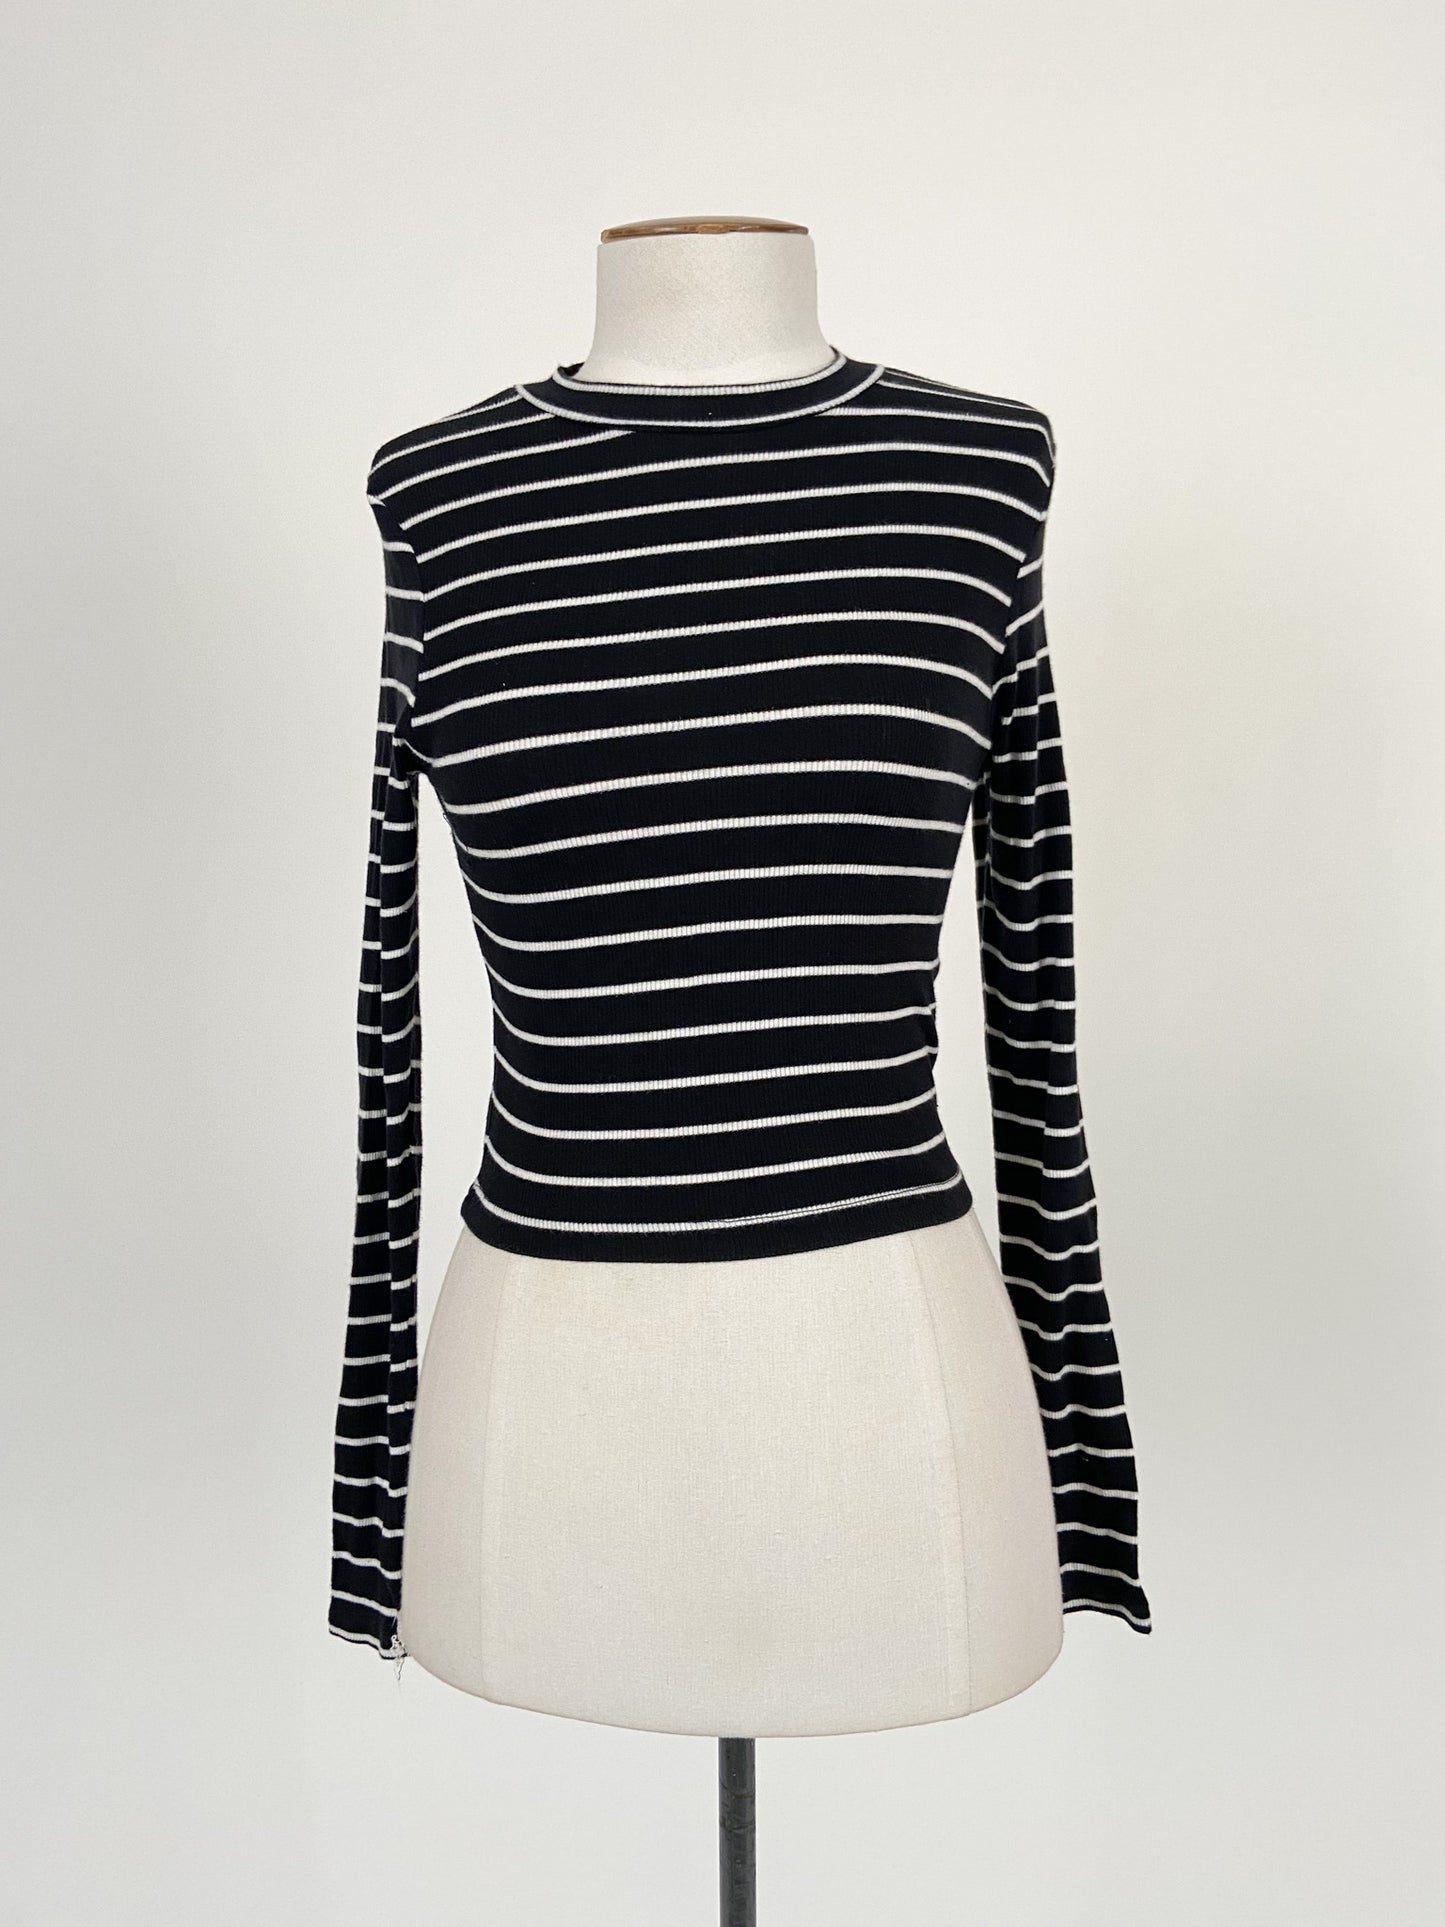 H&M | Black Casual Top | Size XS